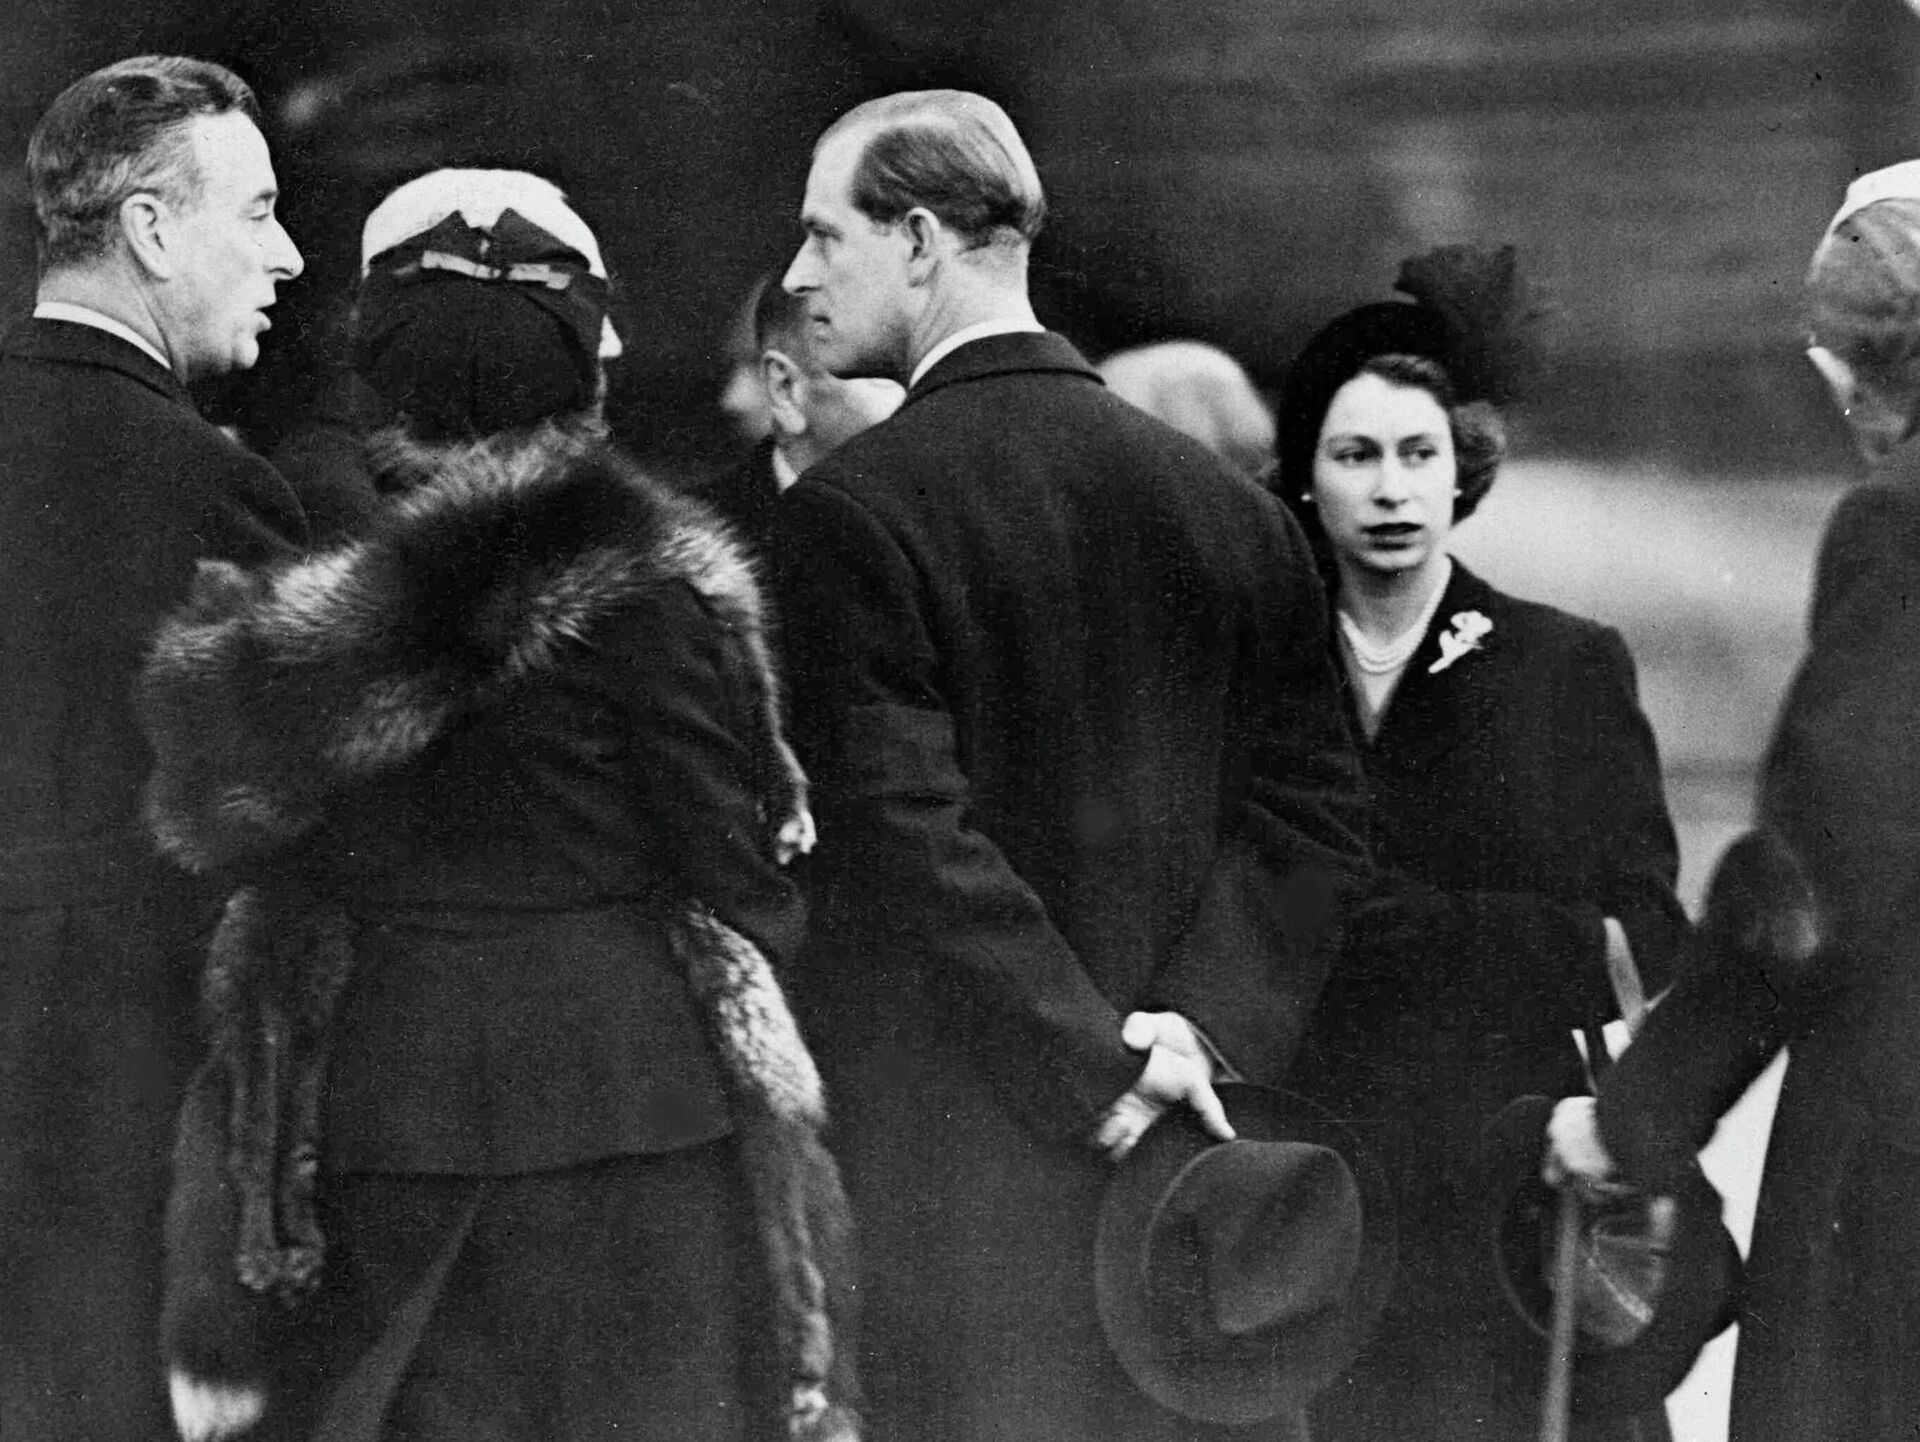 Britain's Queen Elizabeth II, right, and her husband Prince Philip, the Duke of Edinburgh, centre with back to camera, are greeted on their arrival at London Airport, on Feb. 7, 1952. The royal couple cut short their official trip to Kenya and returned home following the death of King George VI. Prince Philip is talking to Earl Louis Mountbatten of Burma, left. - Sputnik International, 1920, 10.09.2022